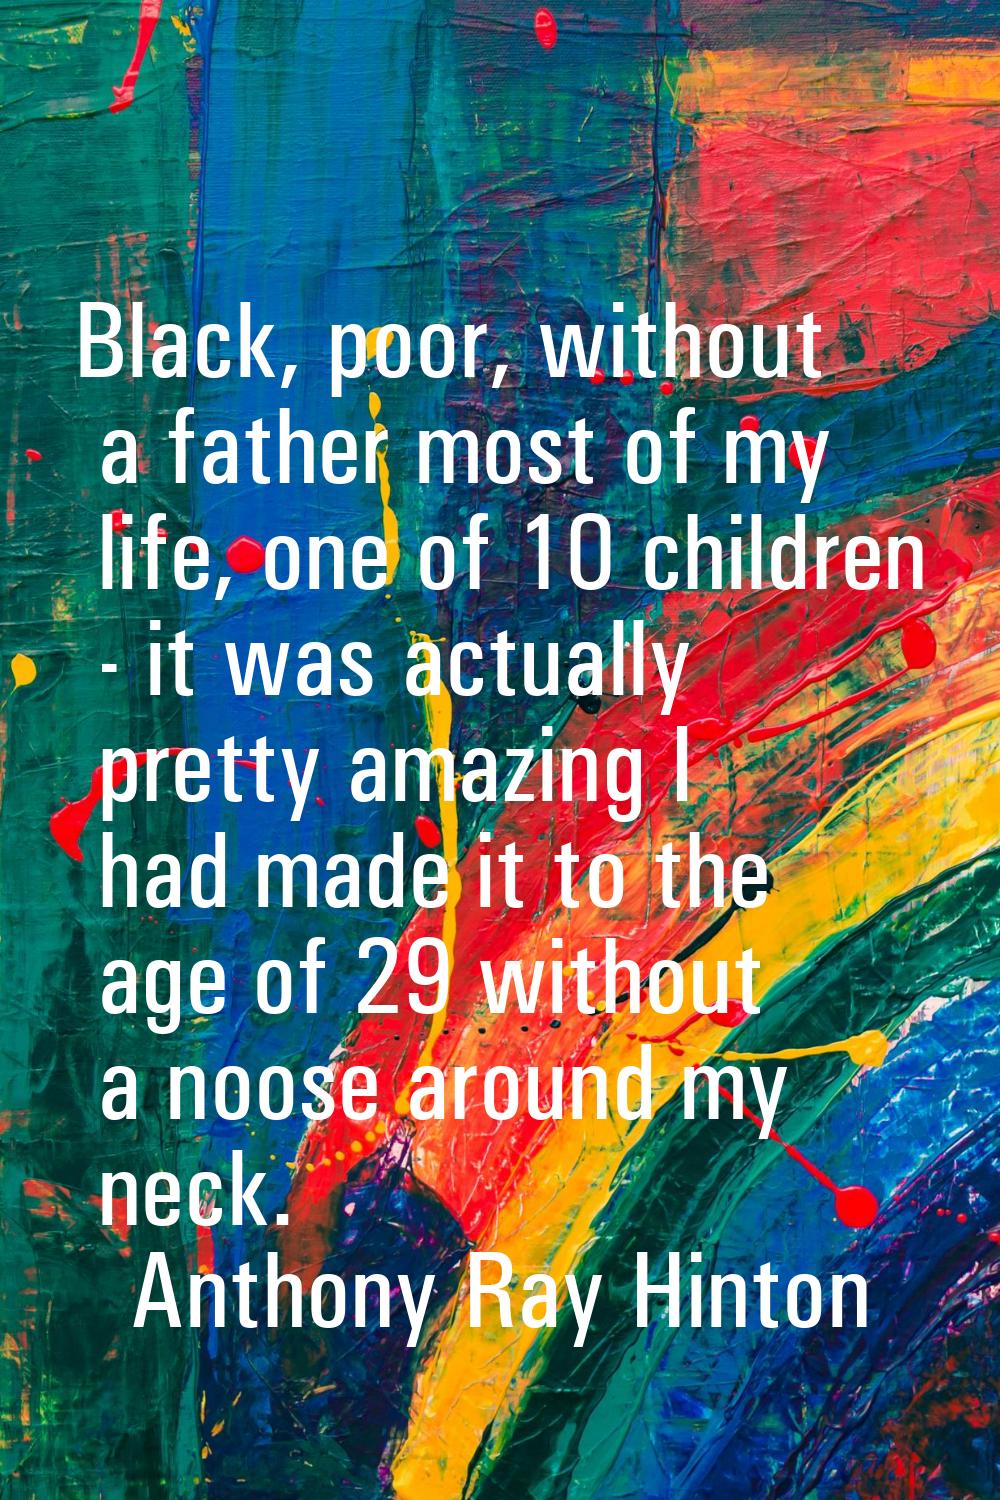 Black, poor, without a father most of my life, one of 10 children - it was actually pretty amazing 